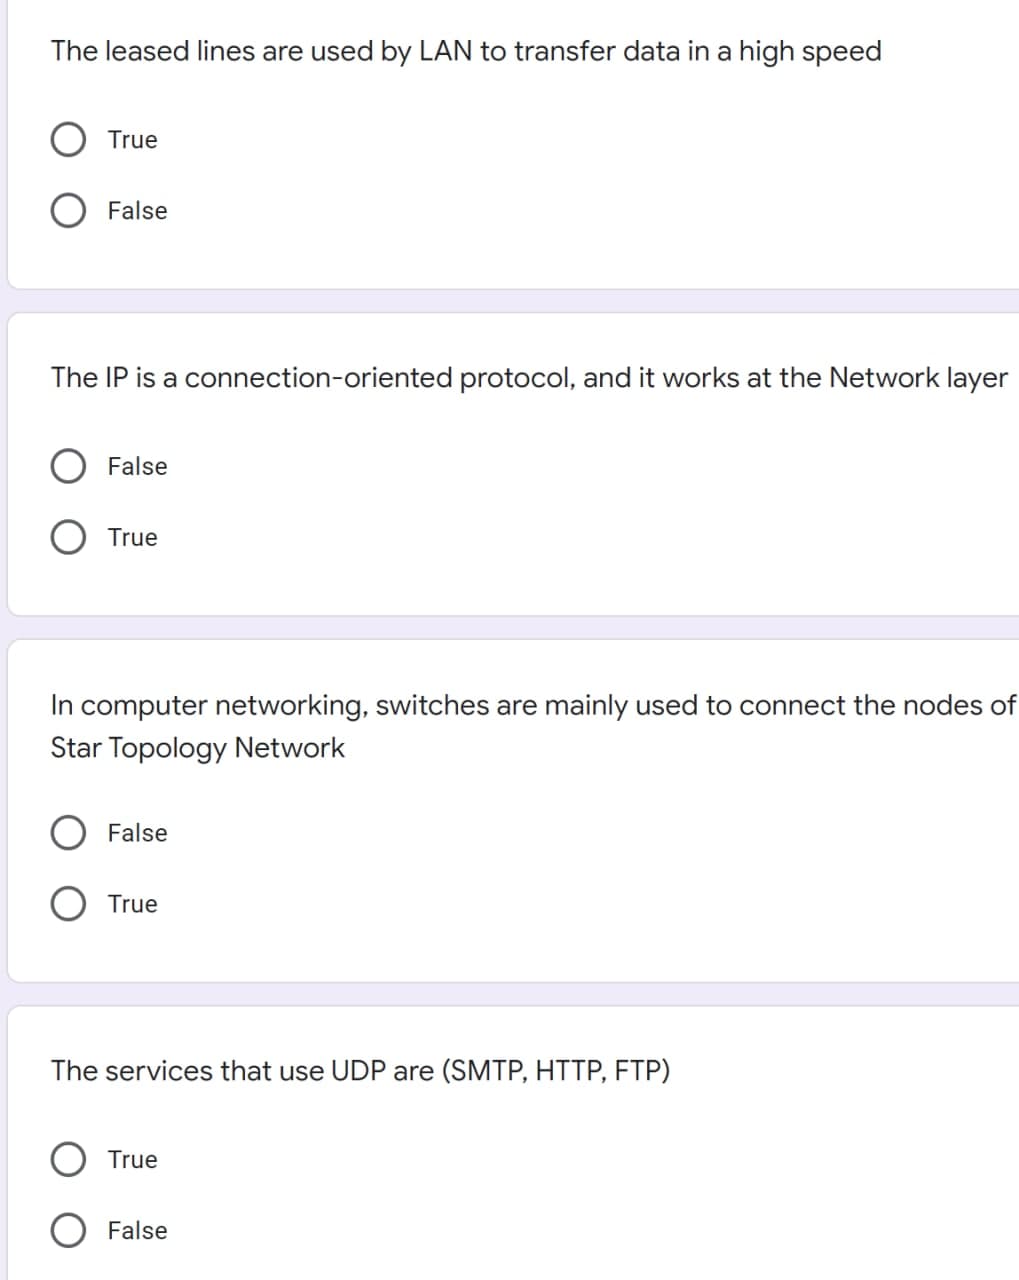 The leased lines are used by LAN to transfer data in a high speed
True
False
The IP is a connection-oriented protocol, and it works at the Network layer
False
True
In computer networking, switches are mainly used to connect the nodes of
Star Topology Network
False
True
The services that use UDP are (SMTP, HTTP, FTP)
True
False
